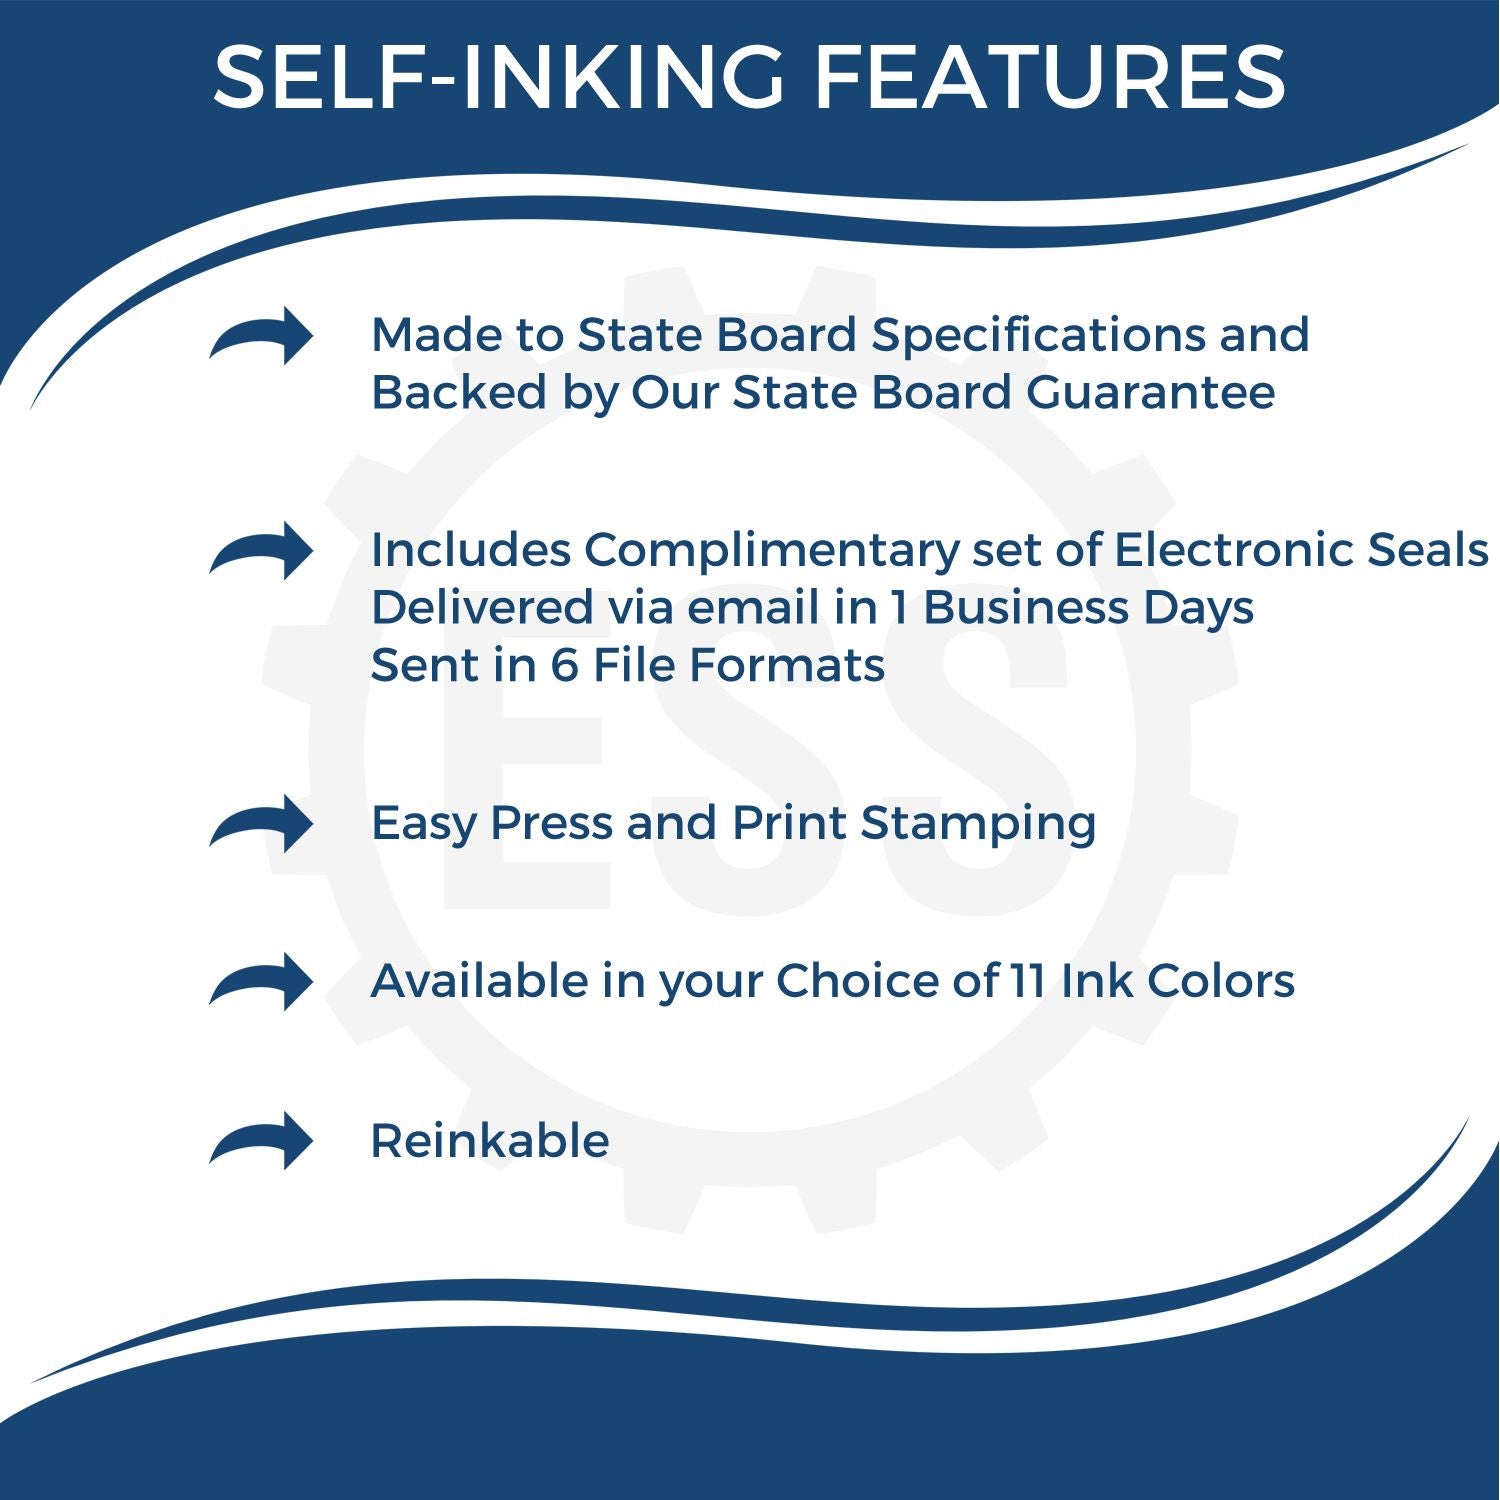 A picture of an infographic highlighting the selling points for the Self-Inking Idaho Landscape Architect Stamp